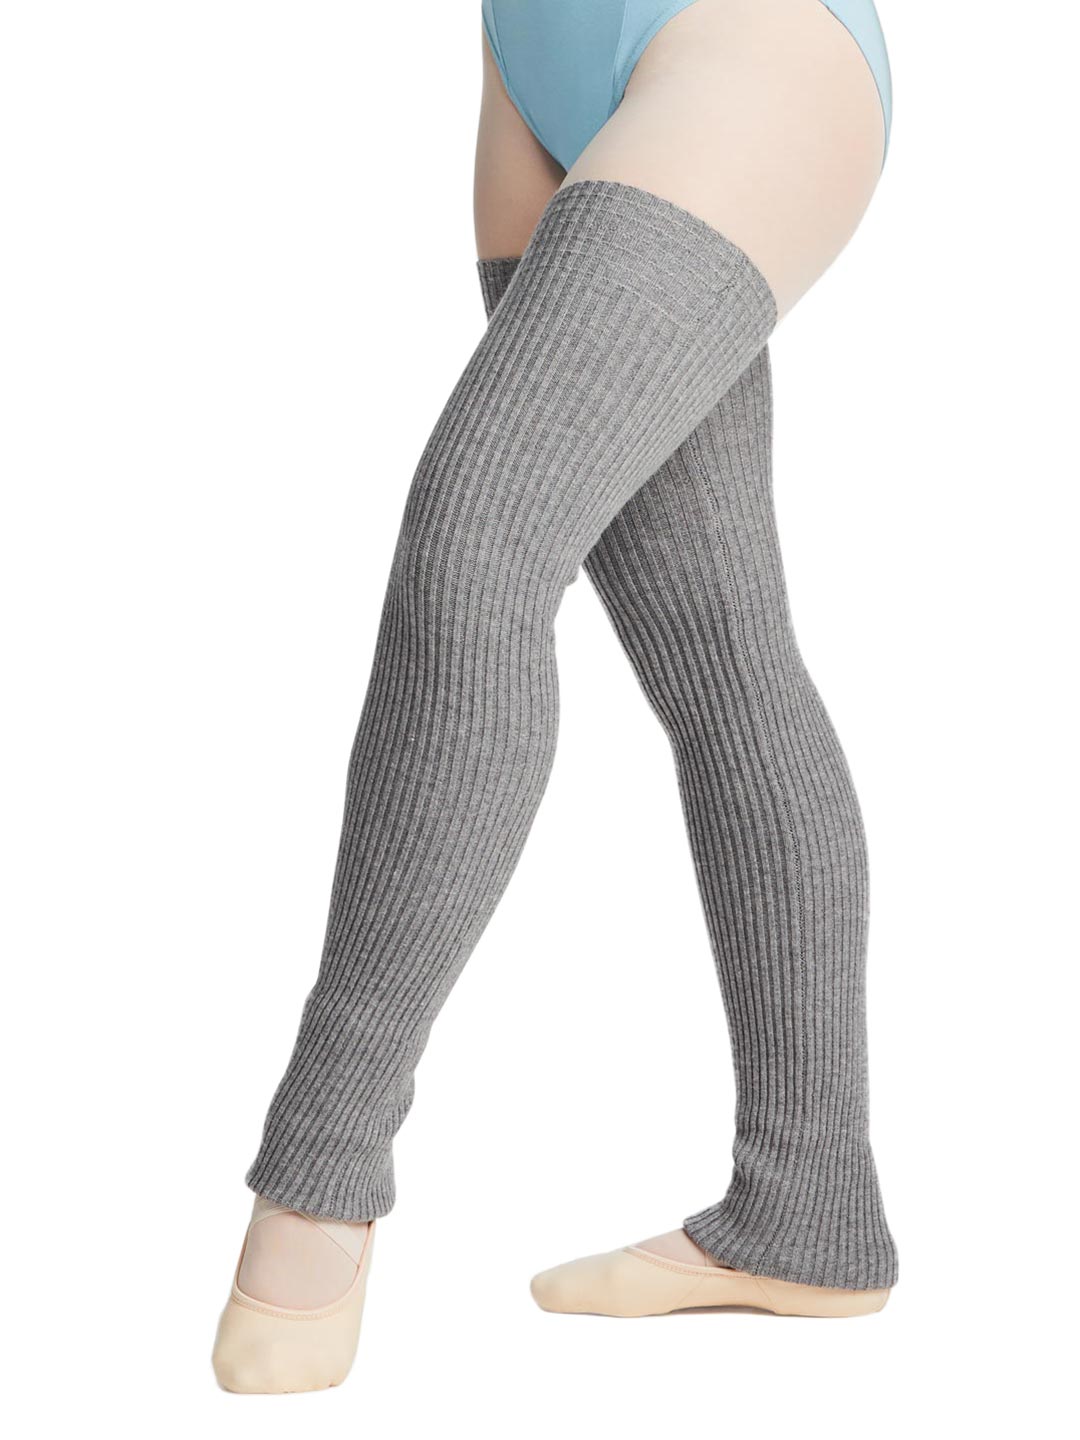 Capezio 36" knit legwarmers grey sold by The Collective Dancewear